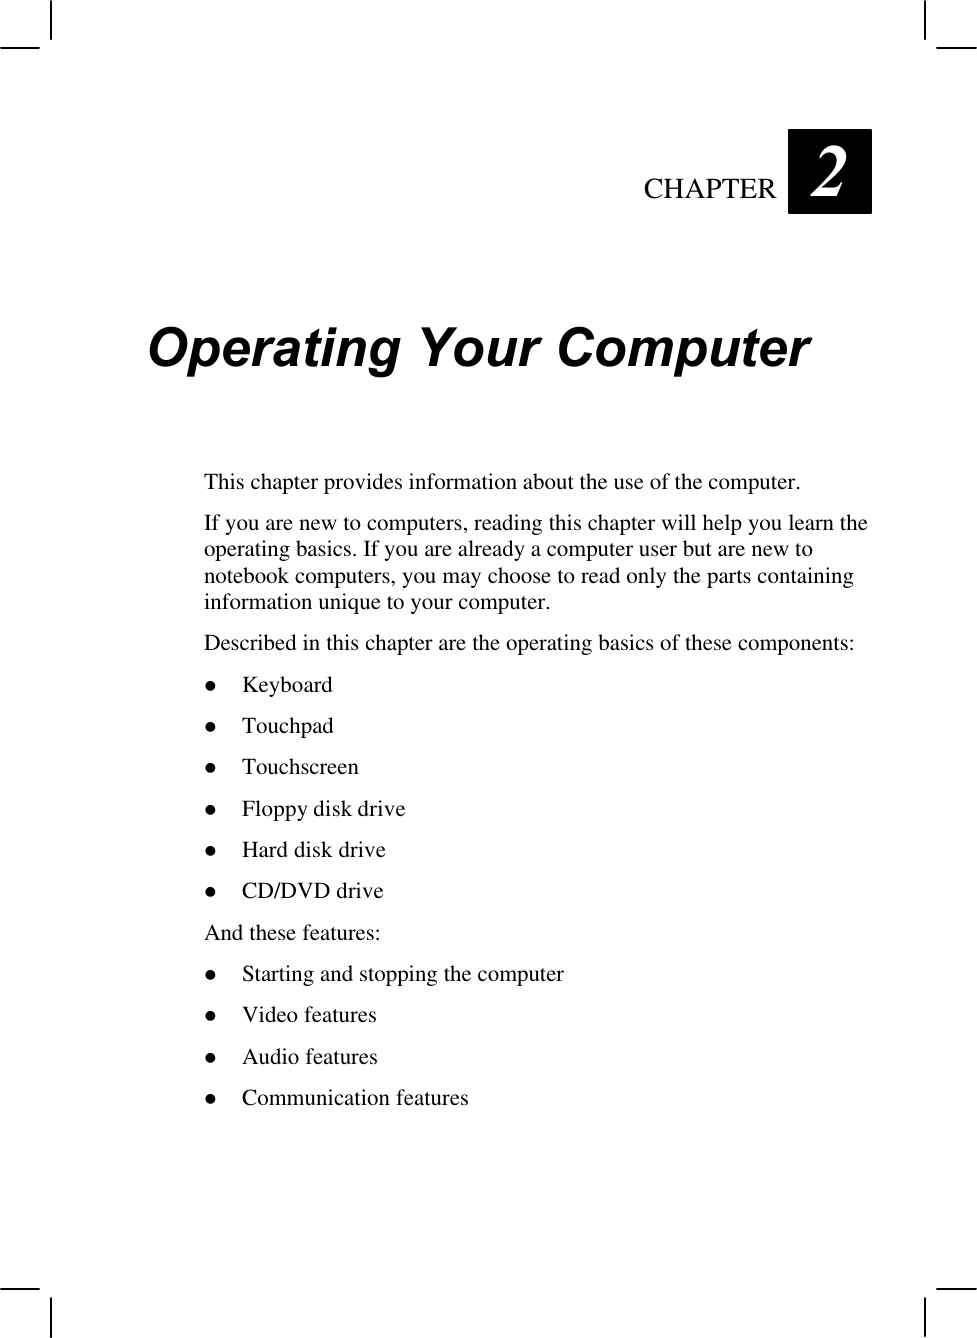 CHAPTER  2Operating Your ComputerThis chapter provides information about the use of the computer.If you are new to computers, reading this chapter will help you learn theoperating basics. If you are already a computer user but are new tonotebook computers, you may choose to read only the parts containinginformation unique to your computer.Described in this chapter are the operating basics of these components:l Keyboardl Touchpadl Touchscreenl Floppy disk drivel Hard disk drivel CD/DVD driveAnd these features:l Starting and stopping the computerl Video featuresl Audio featuresl Communication features